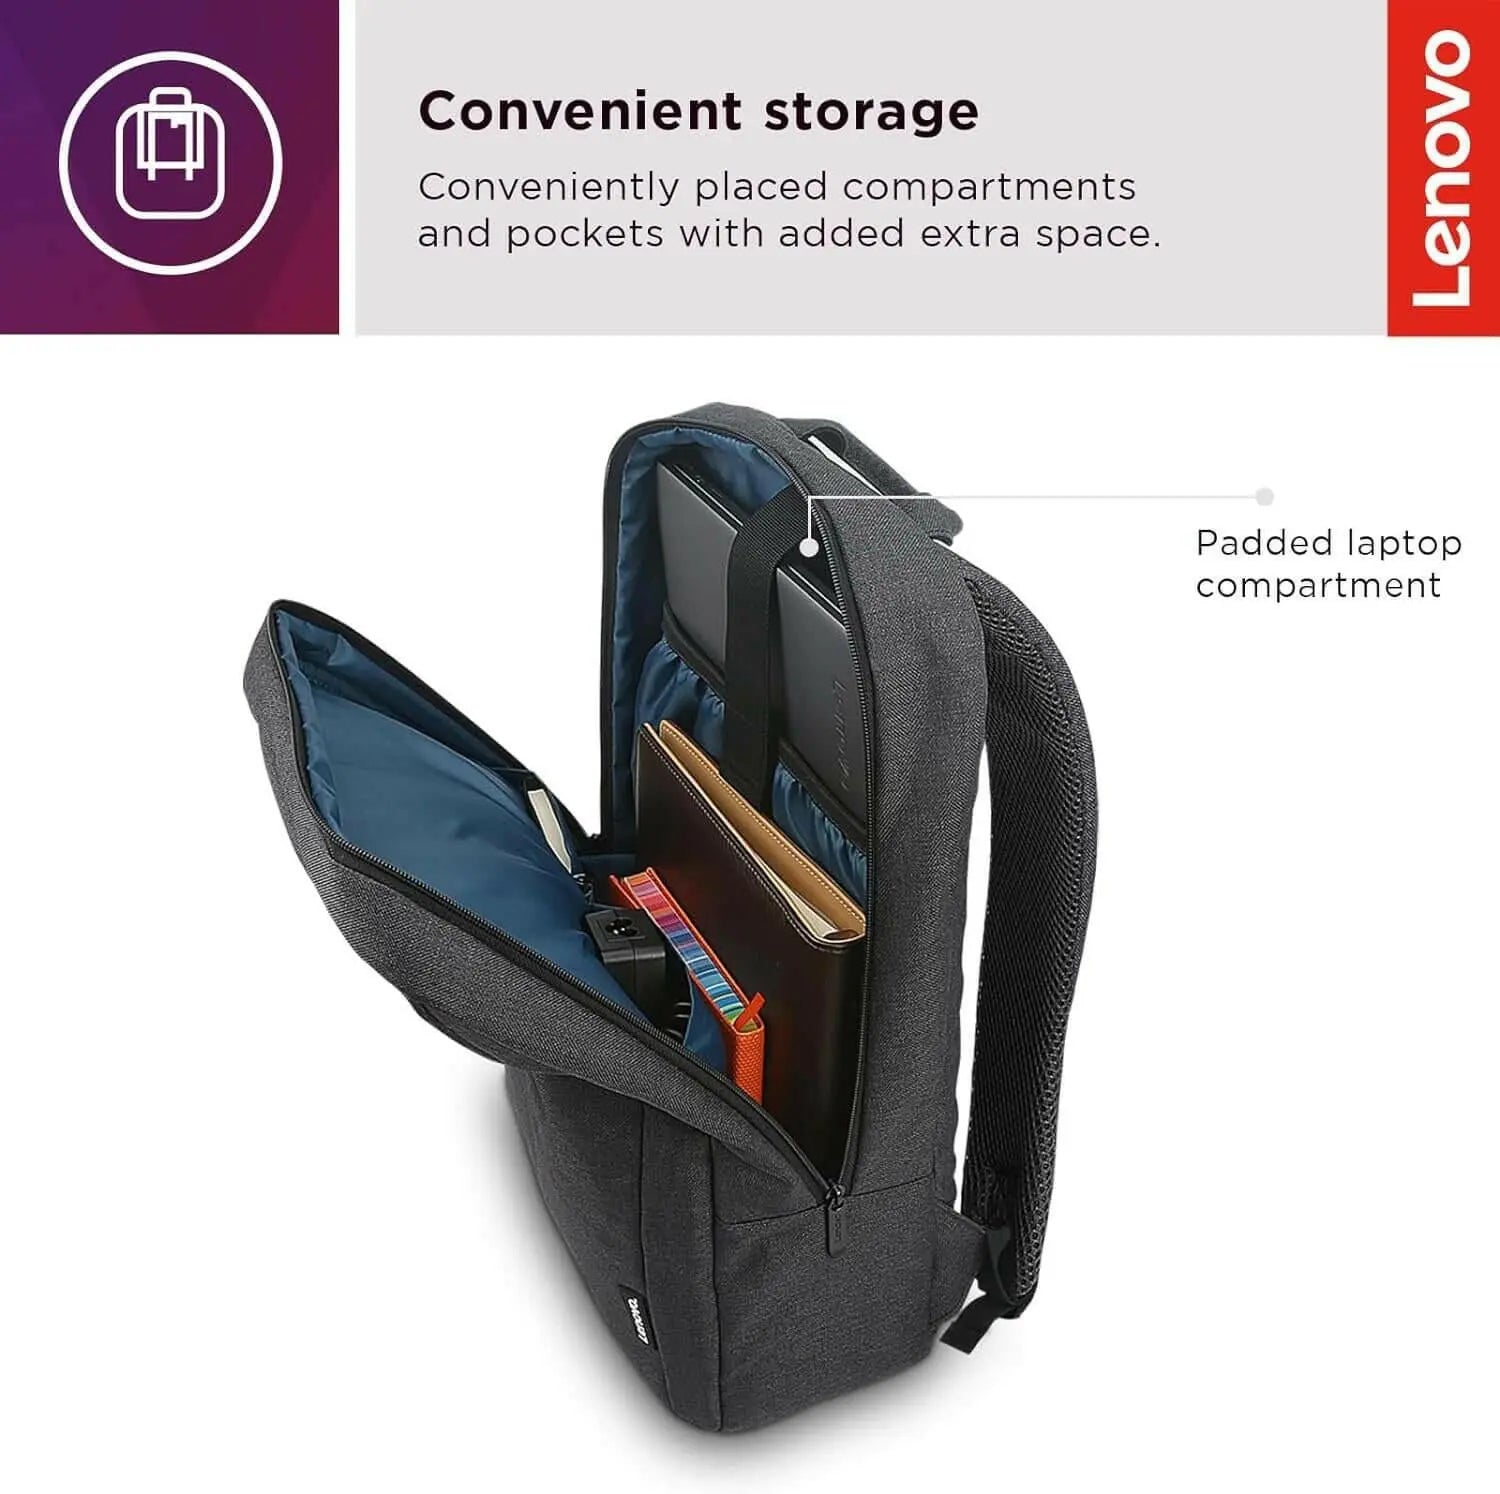 Lenovo B210 15.6 inch Casual Laptop Backpack